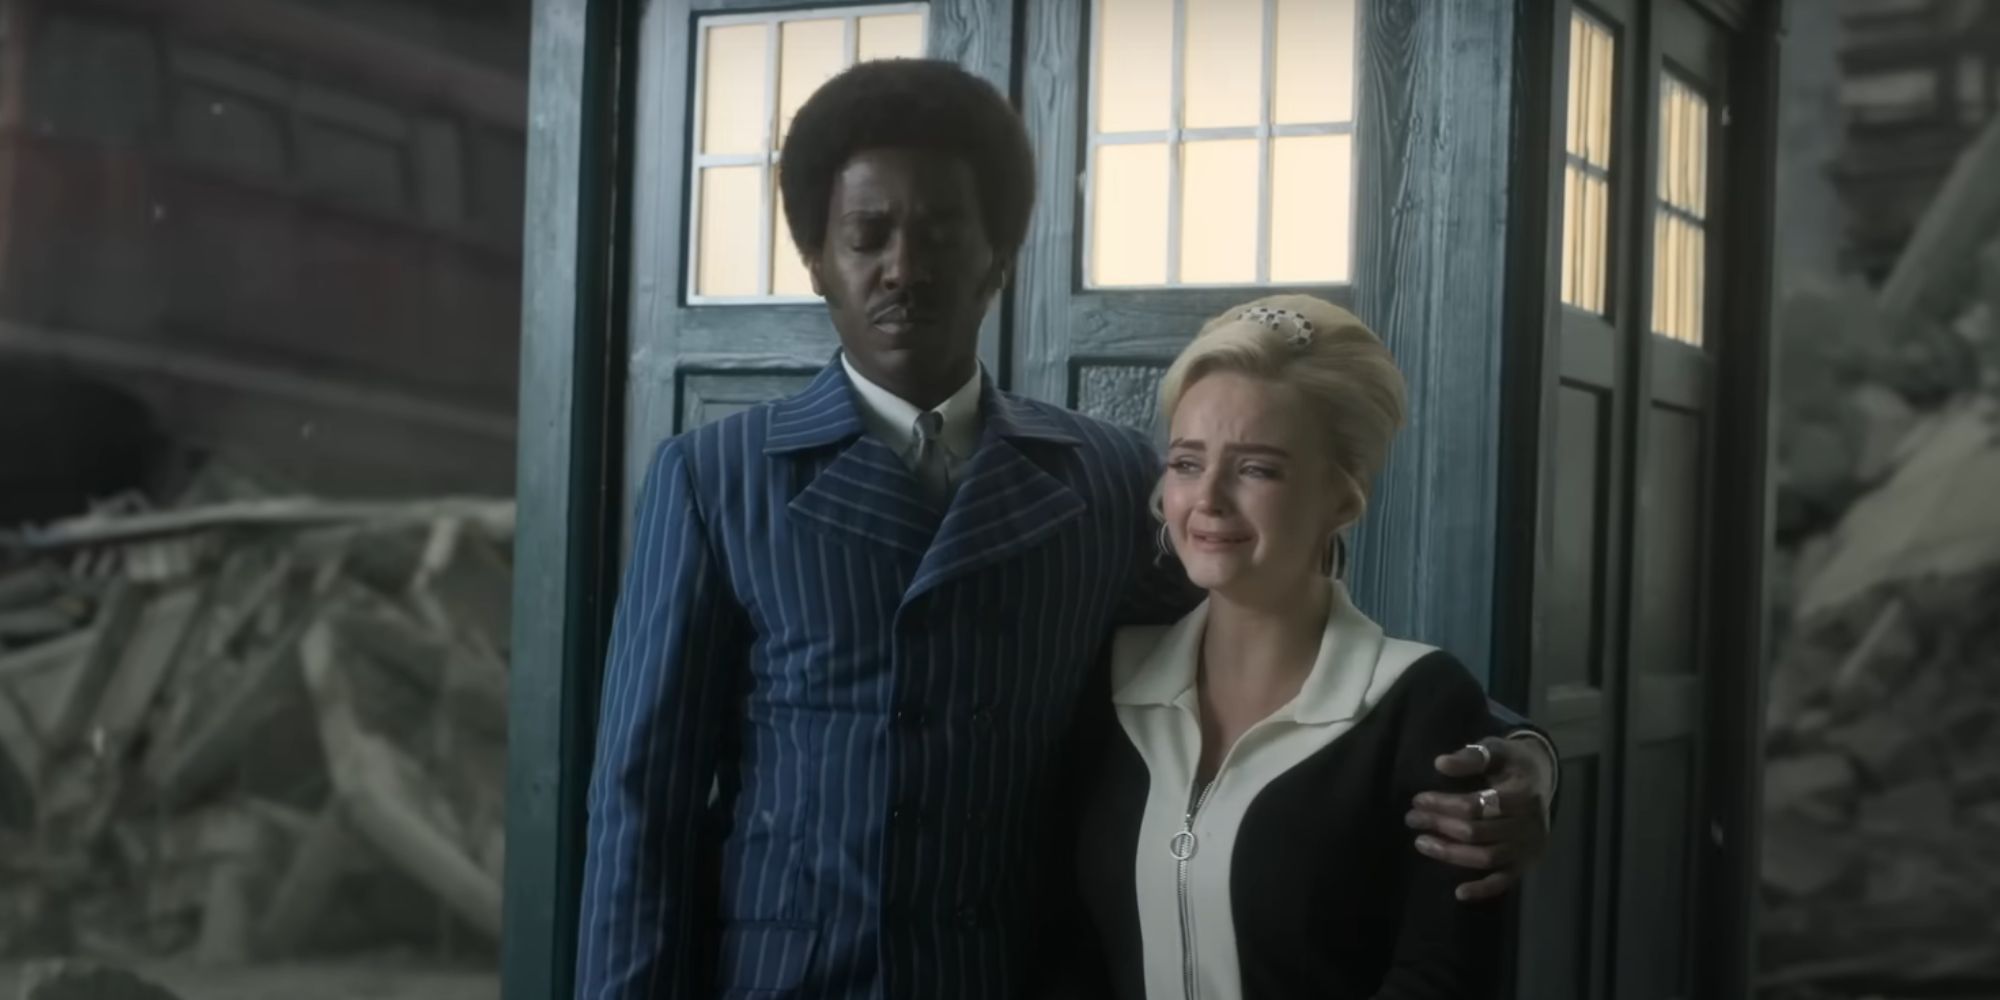 Ncuti Gatwa as the Fifteenth Doctor with his arm around a sobbing Millie Gibson as Ruby Sunday in the Doctor Who season 14 trailer